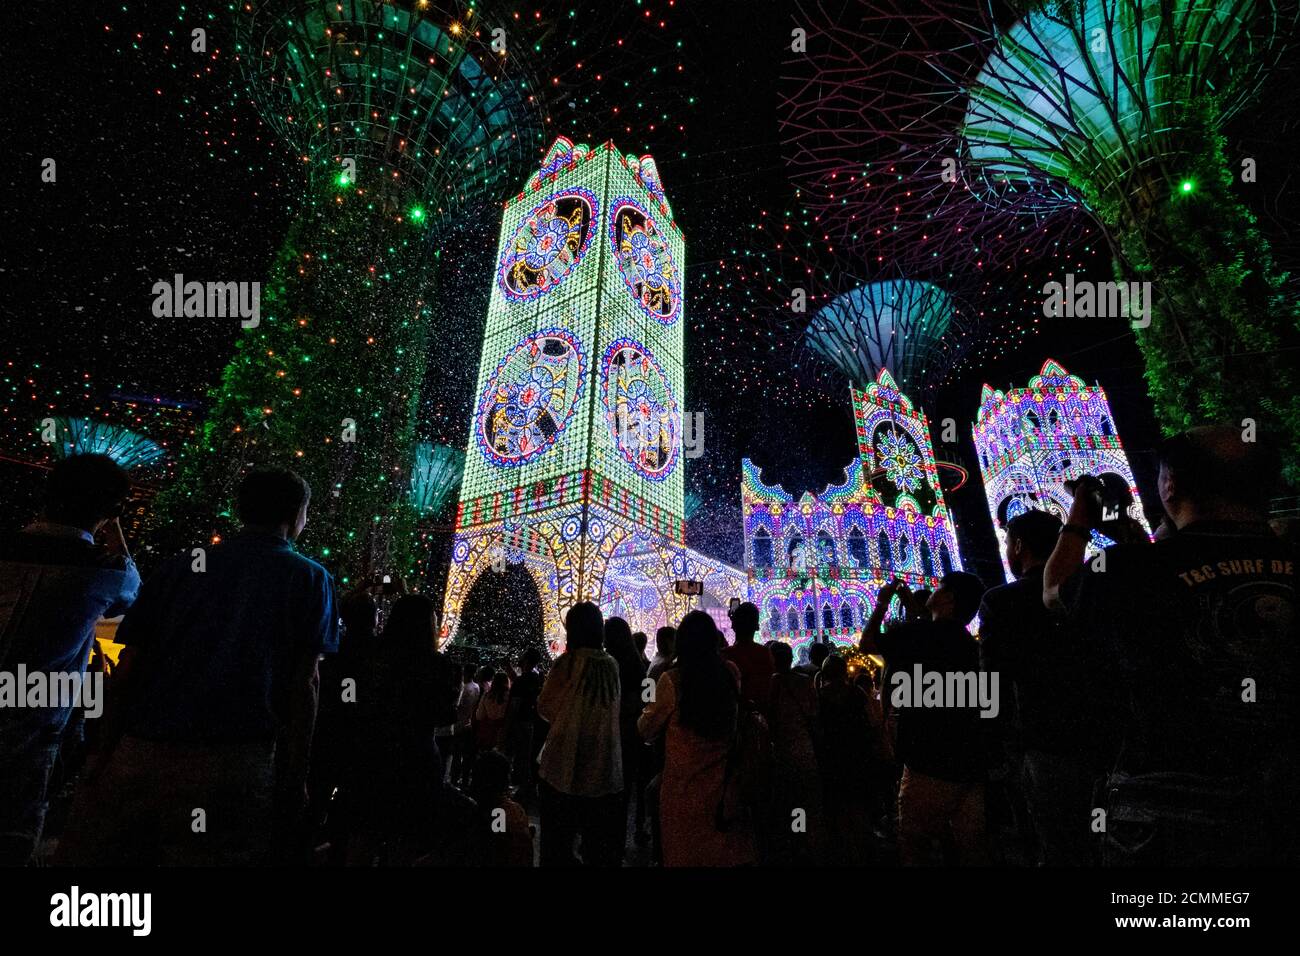 People View Luminarie Light Sculptures Amid Snow Foam During The Christmas Wonderland Event At Gardens By The Bay In Singapore December 15 19 Picture Taken December 15 19 Reuters Loriene Perera Stock Photo Alamy